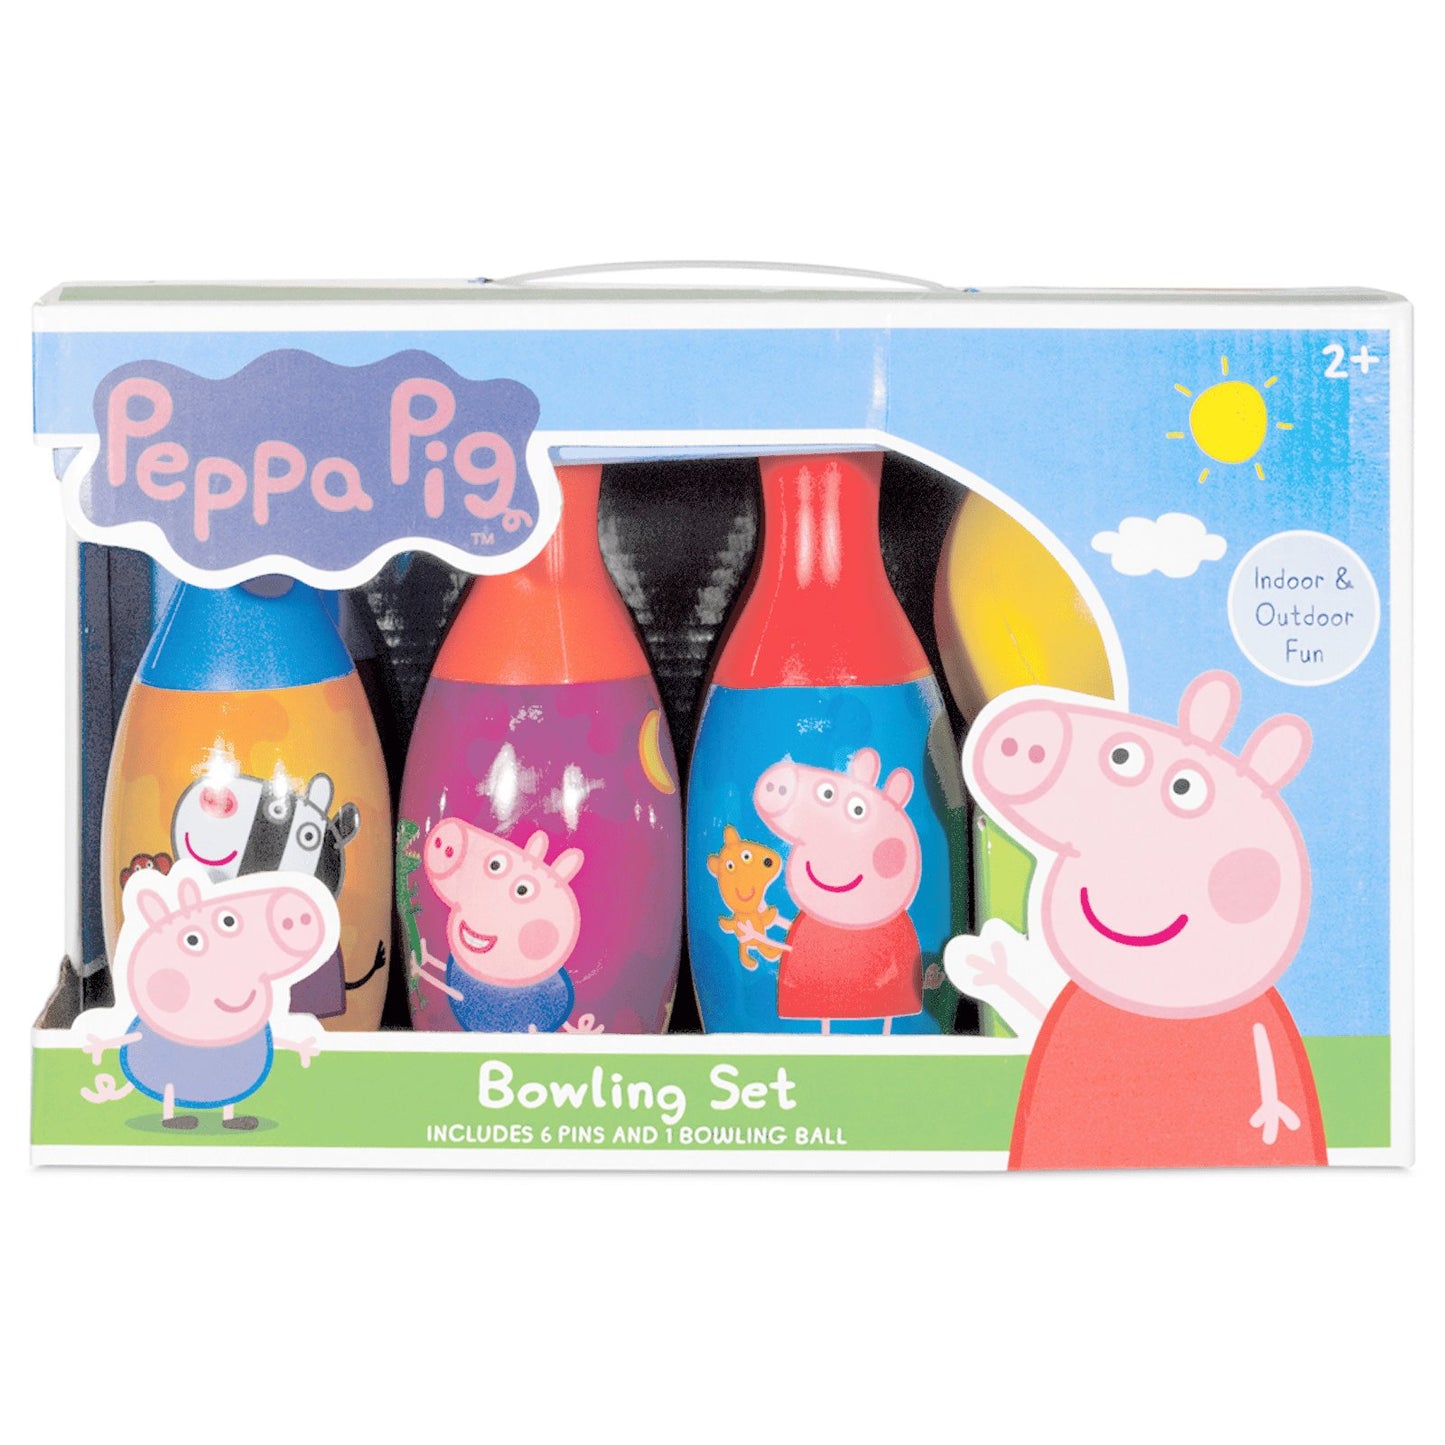 Peppa Pig Bowling Set in Display Box 6 Pins and Bowling Ball for Kids by Disney